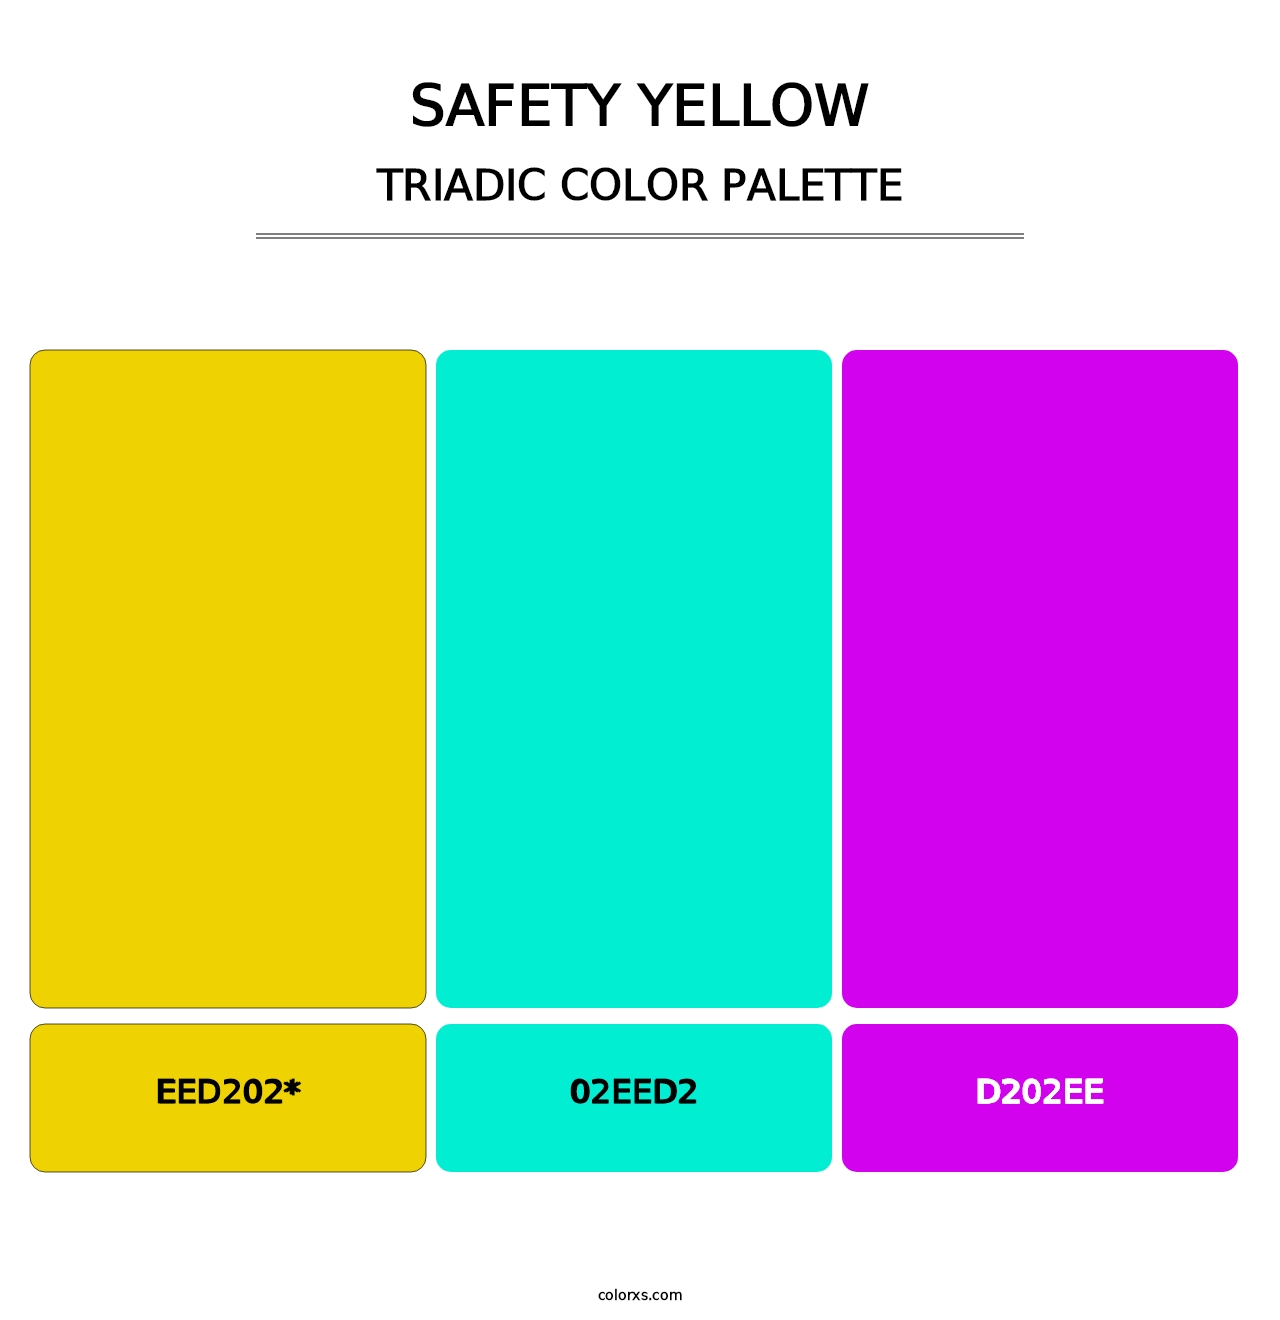 Safety Yellow - Triadic Color Palette